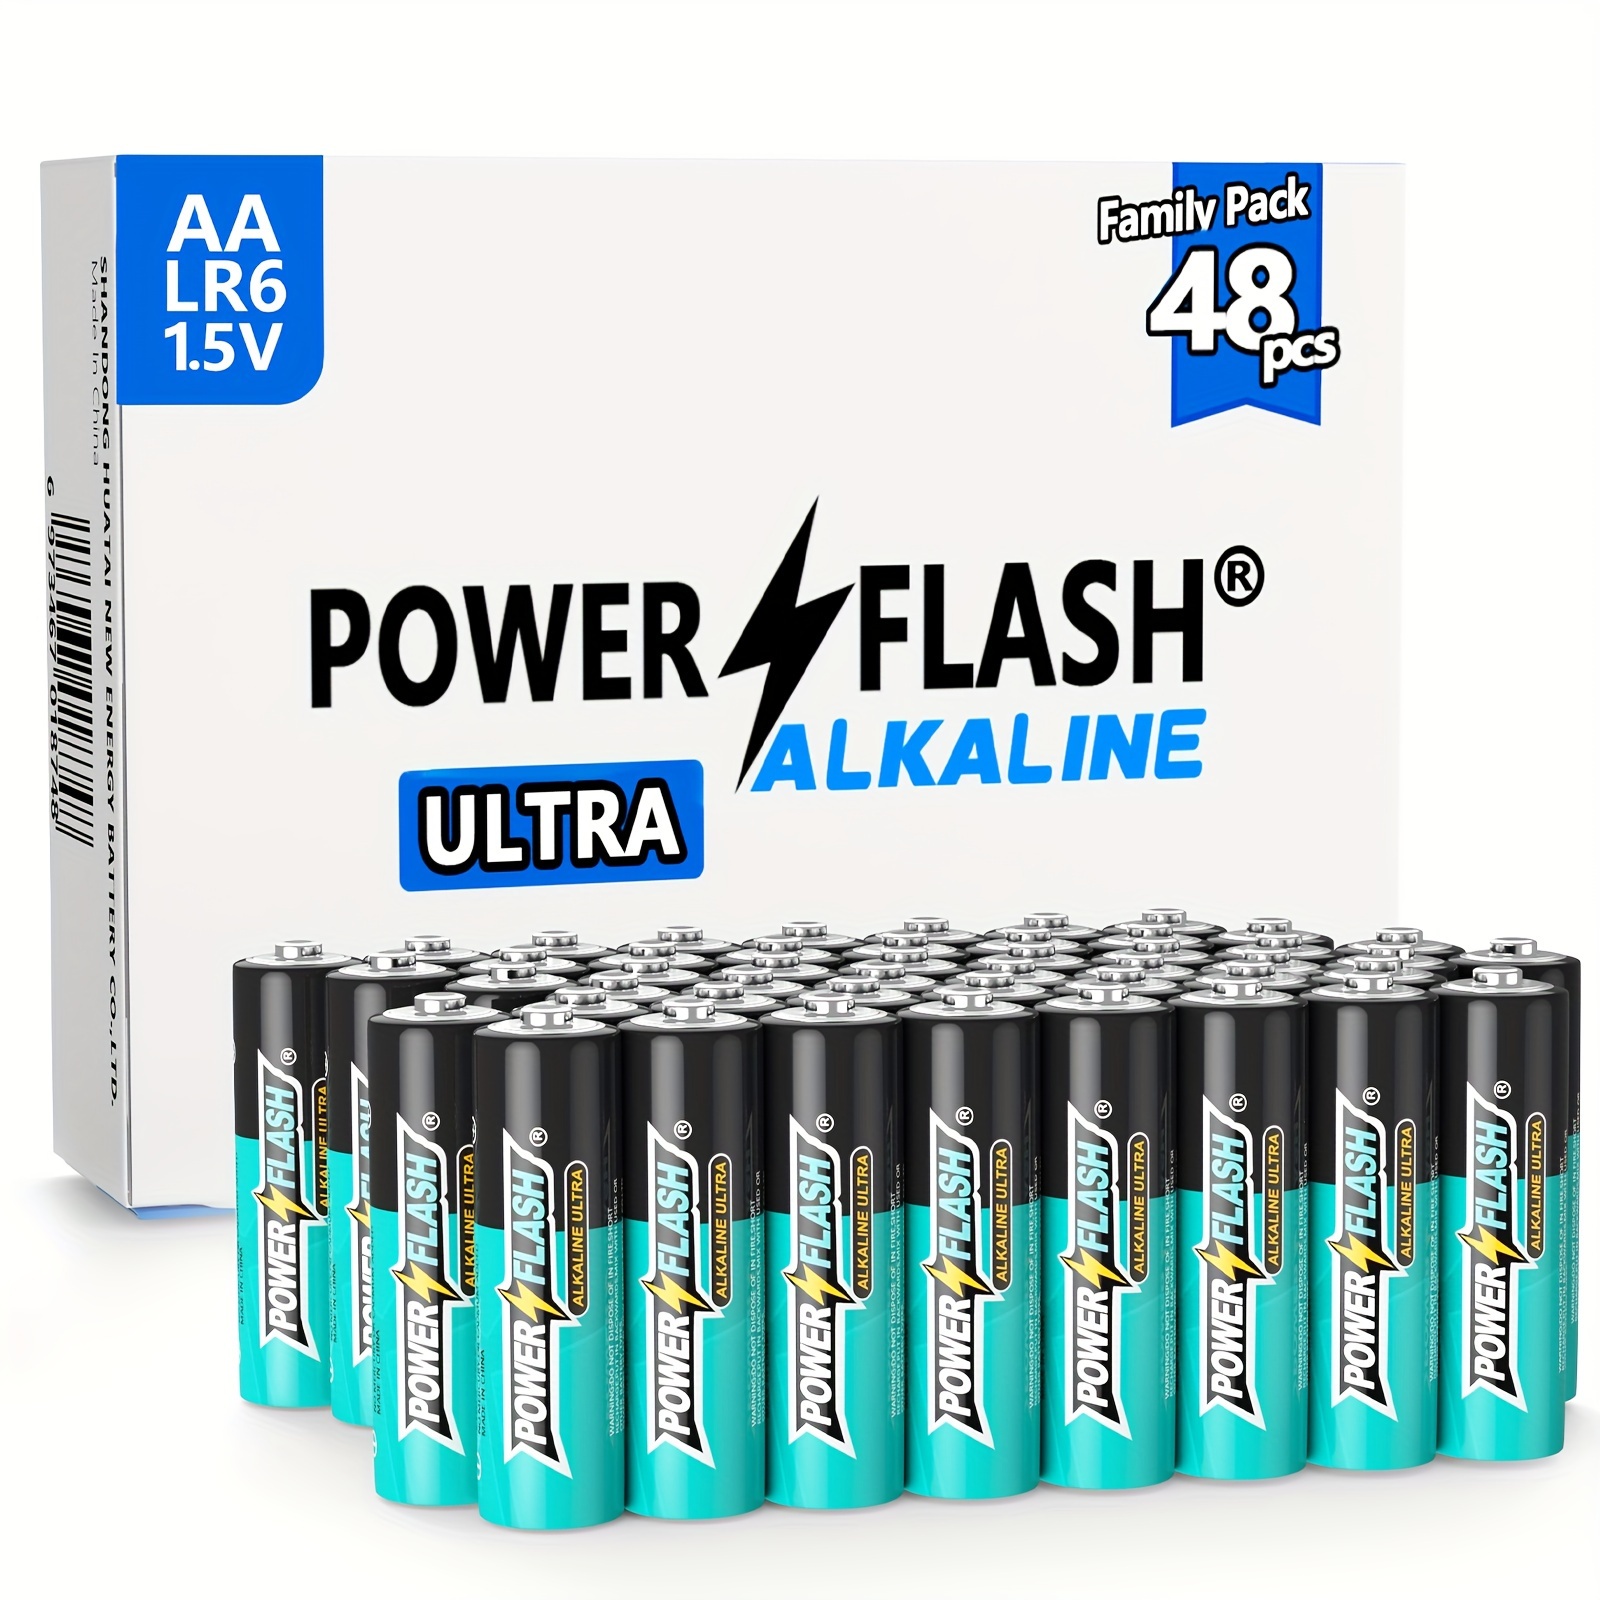 

Huatai Powerflash Aa 48pcs Batteries, Provide Long Lasting Power, Alkaline Batteries For Home, Household Device, Toys